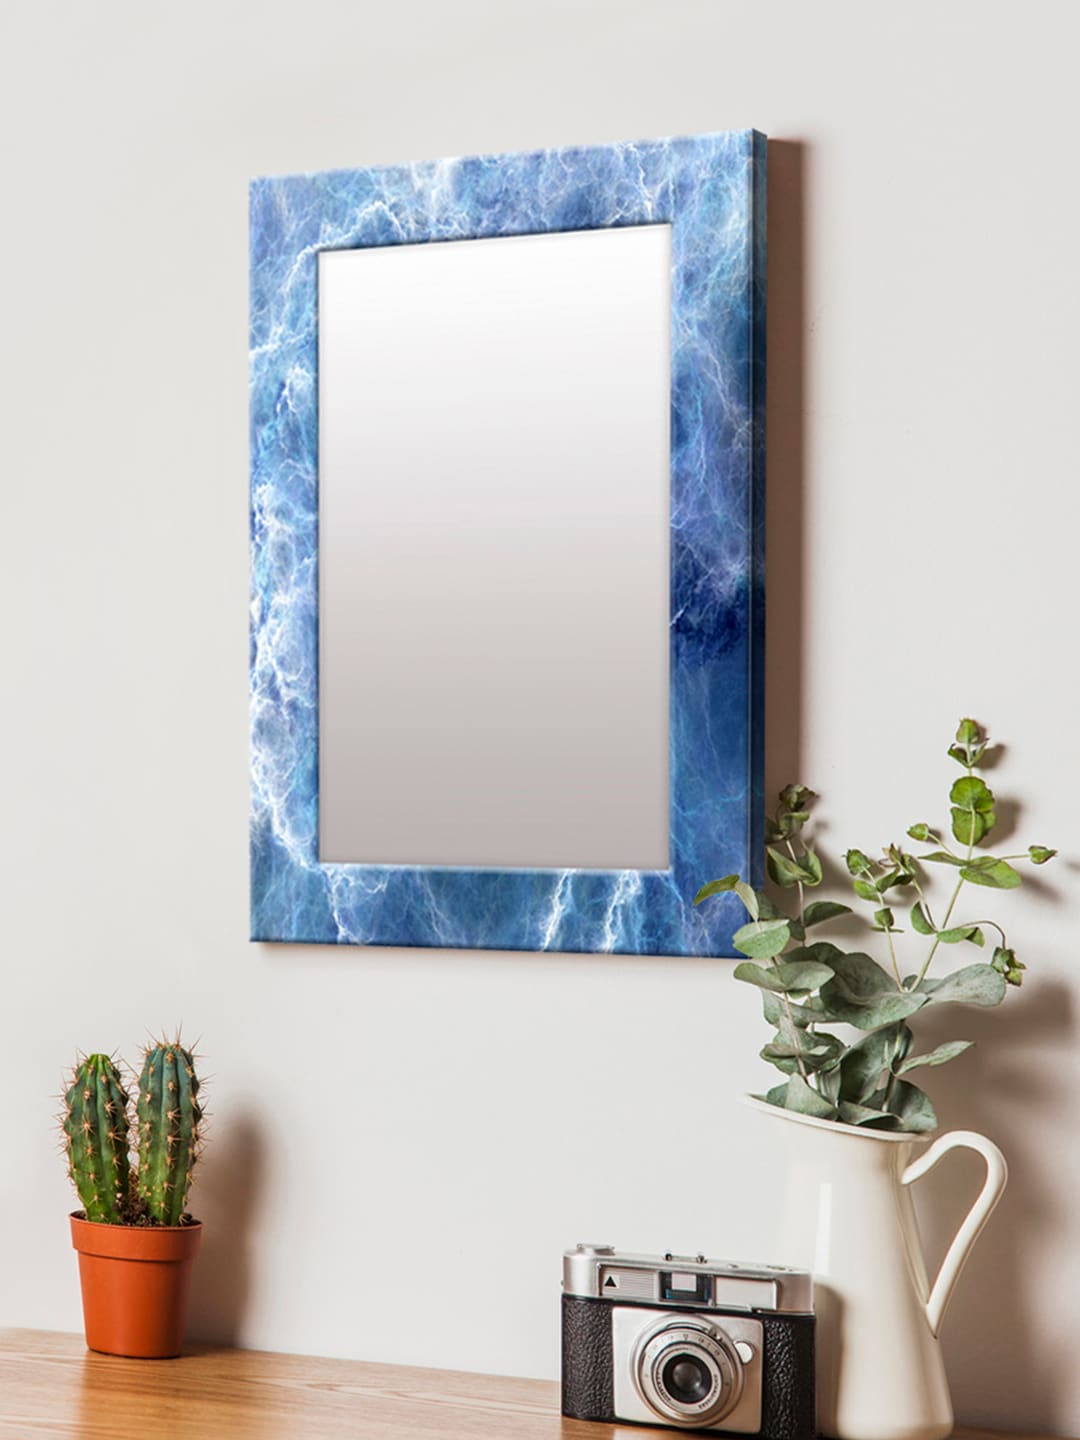 999Store Blue Printed MDF Wall Mirror Price in India